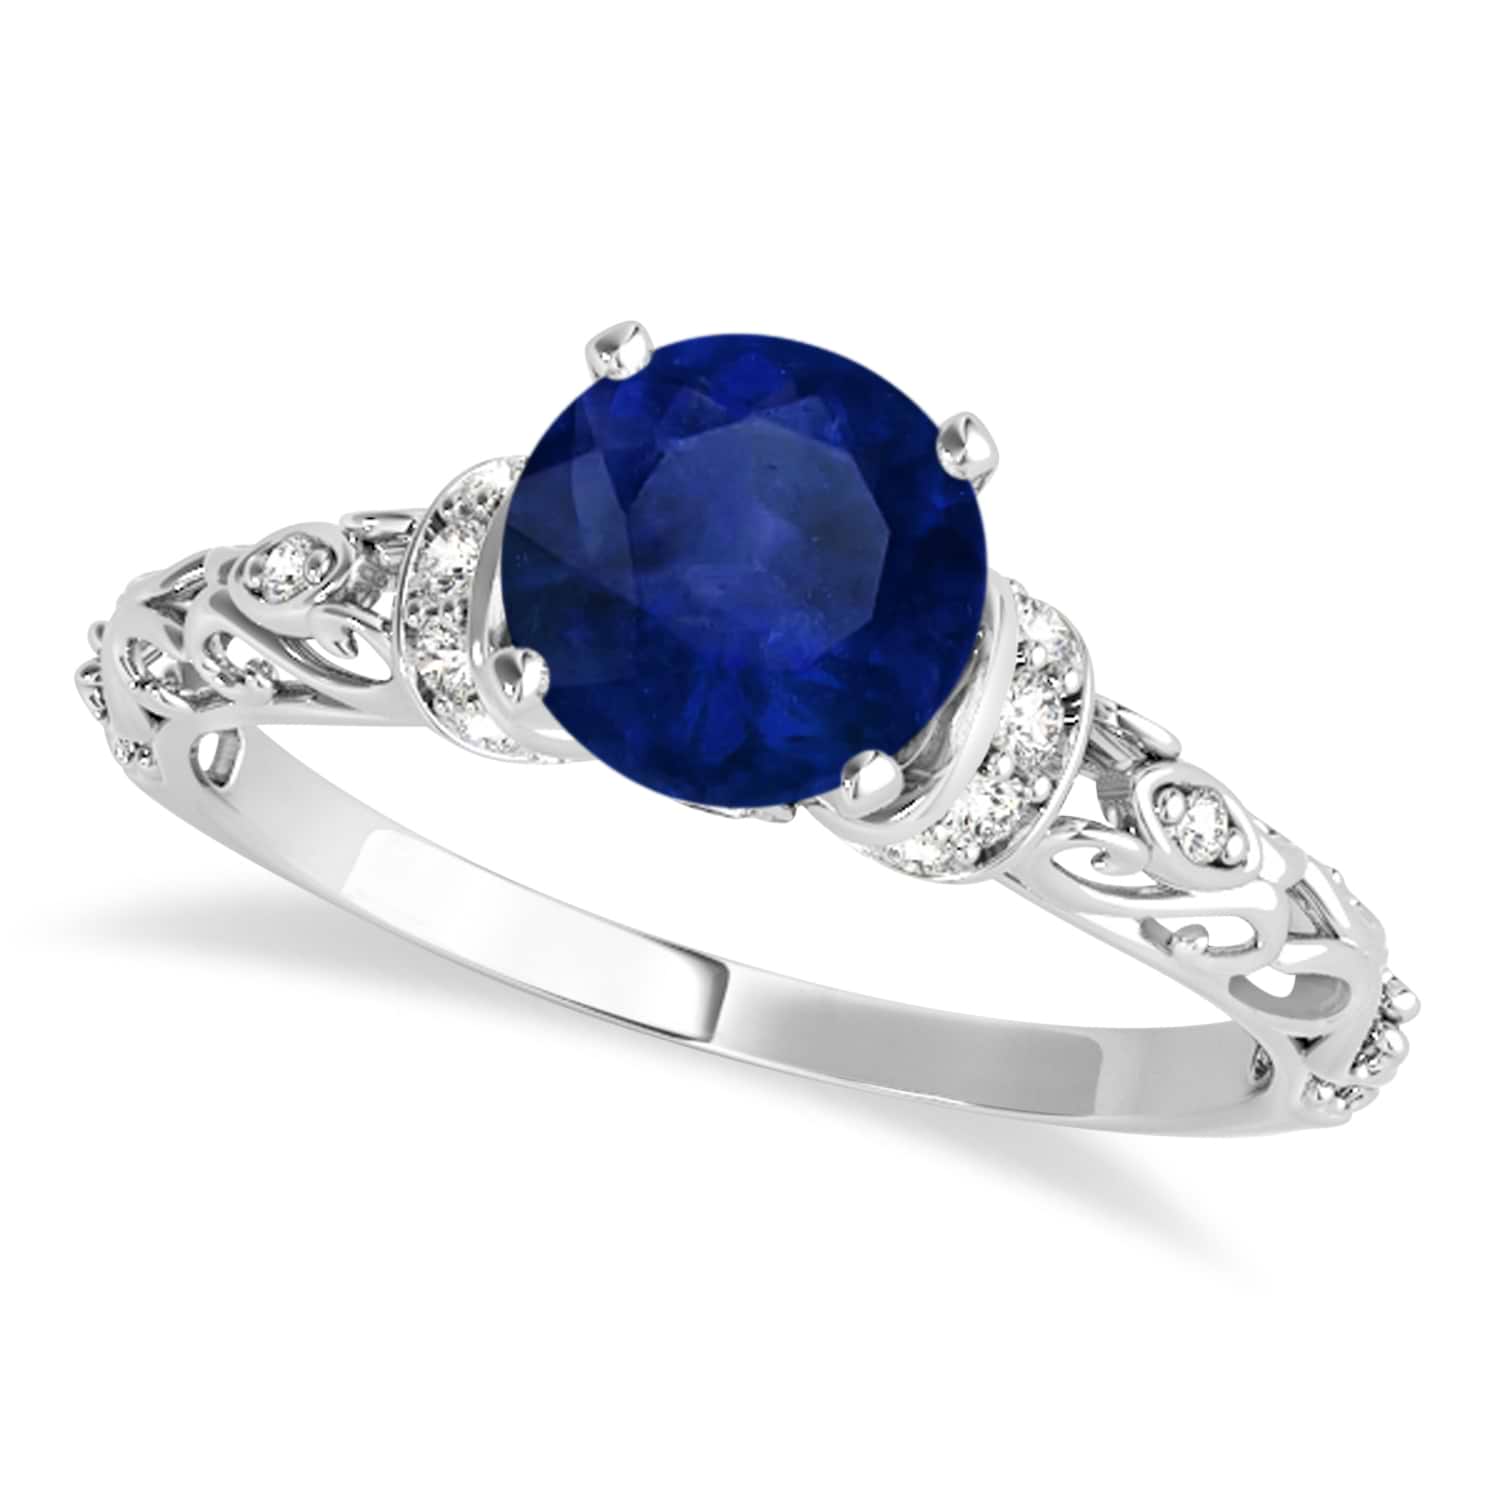 Blue Sapphire & Diamond Antique Style Engagement Ring 14k White Gold (1.62ct)